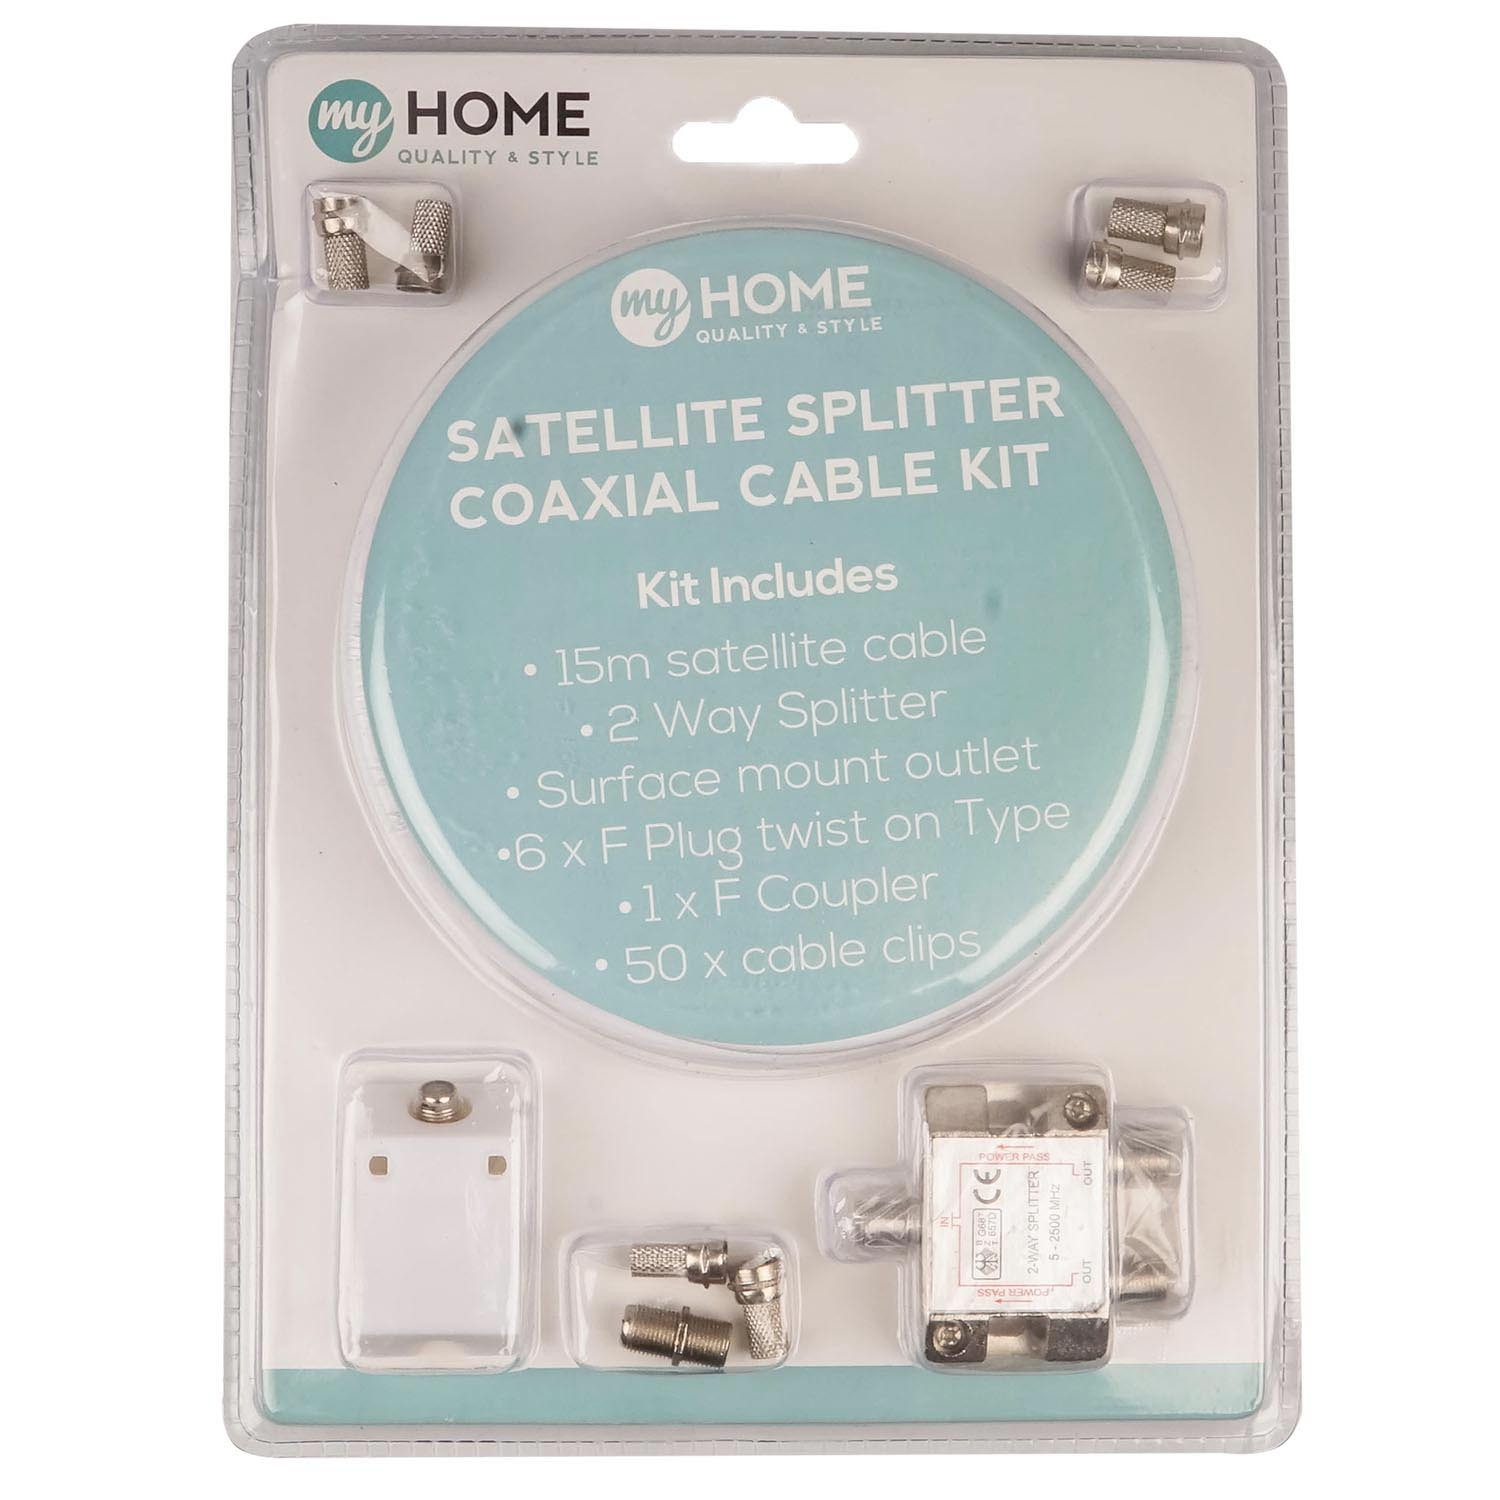 My Home Satellite Splitter Coaxial Cable Kit Image